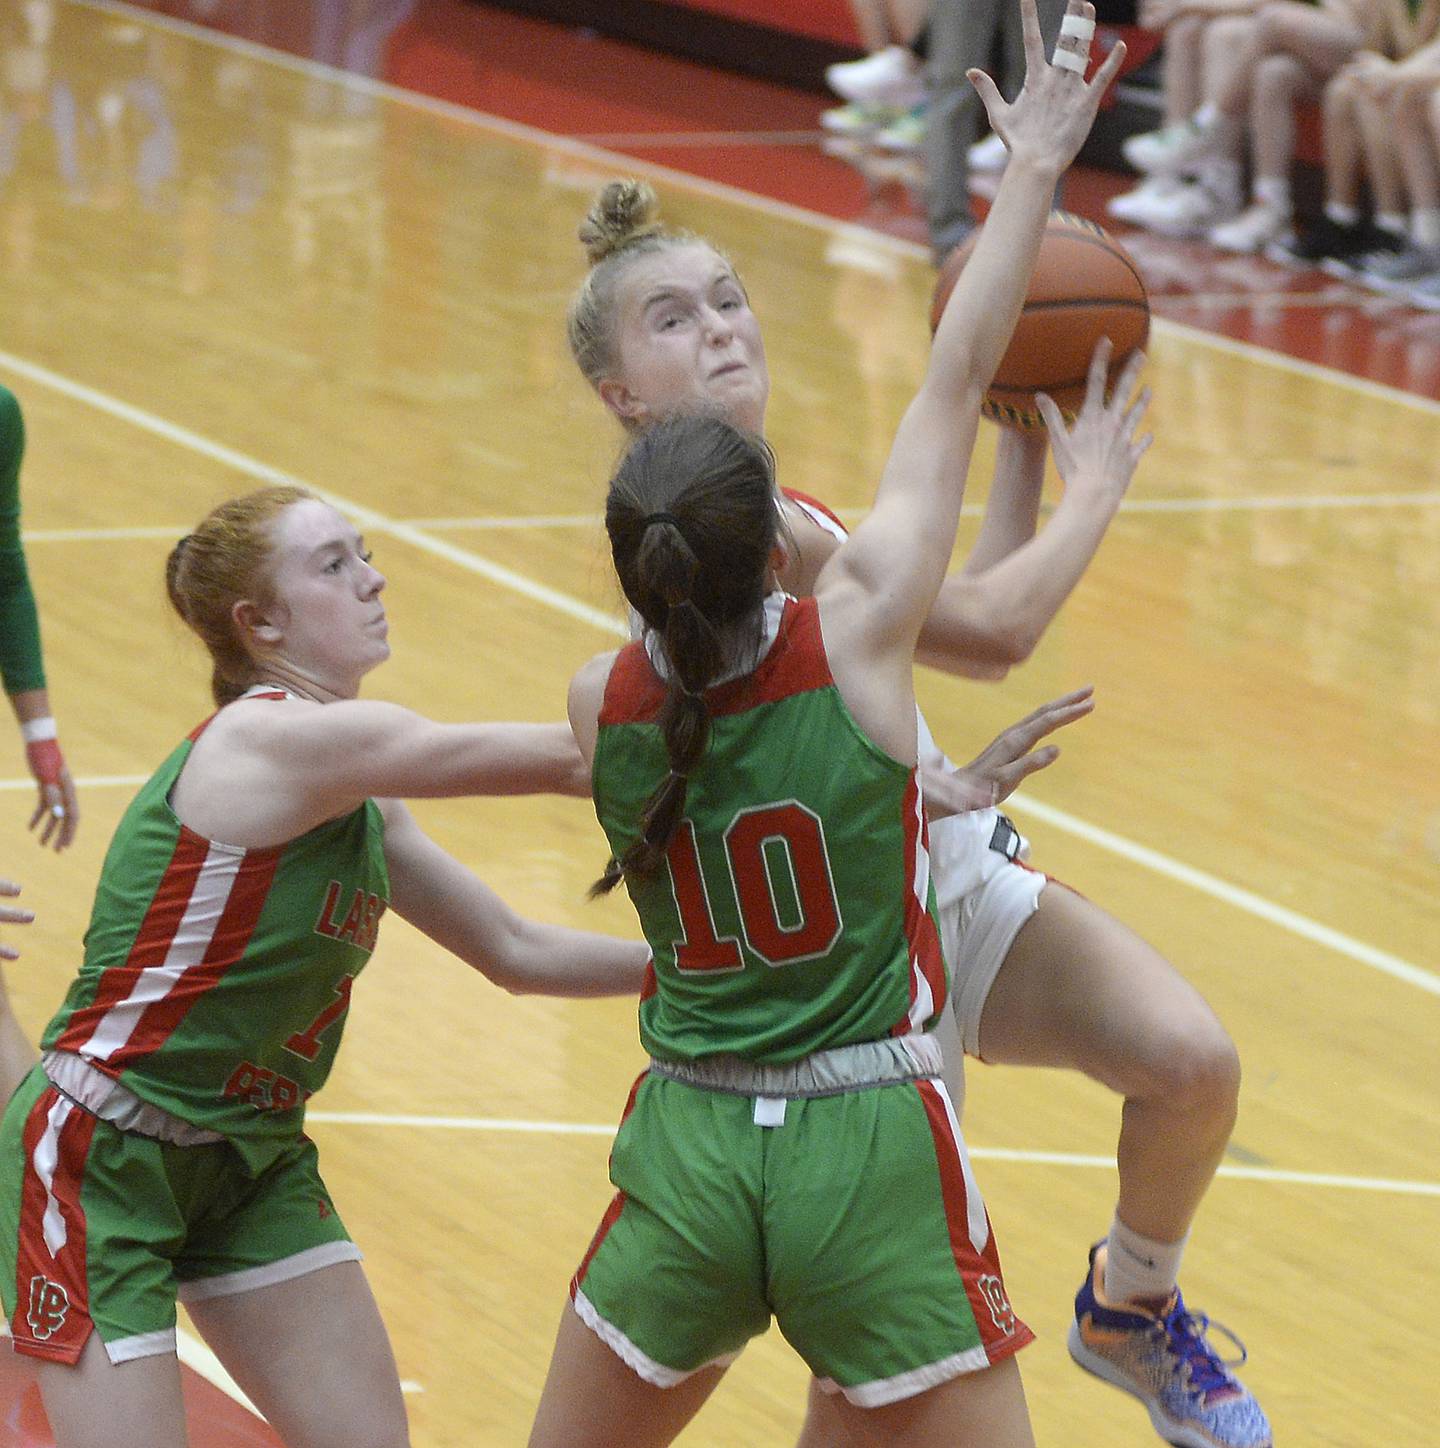 Ottawa’s Grace Carroll works to get up and over LaSalle Peru’s Addison Dutlinger and Bailey Pode in the 2nd period on Wednesday Dec. 7, 2022 at Kingman Gymnasium in Ottawa.